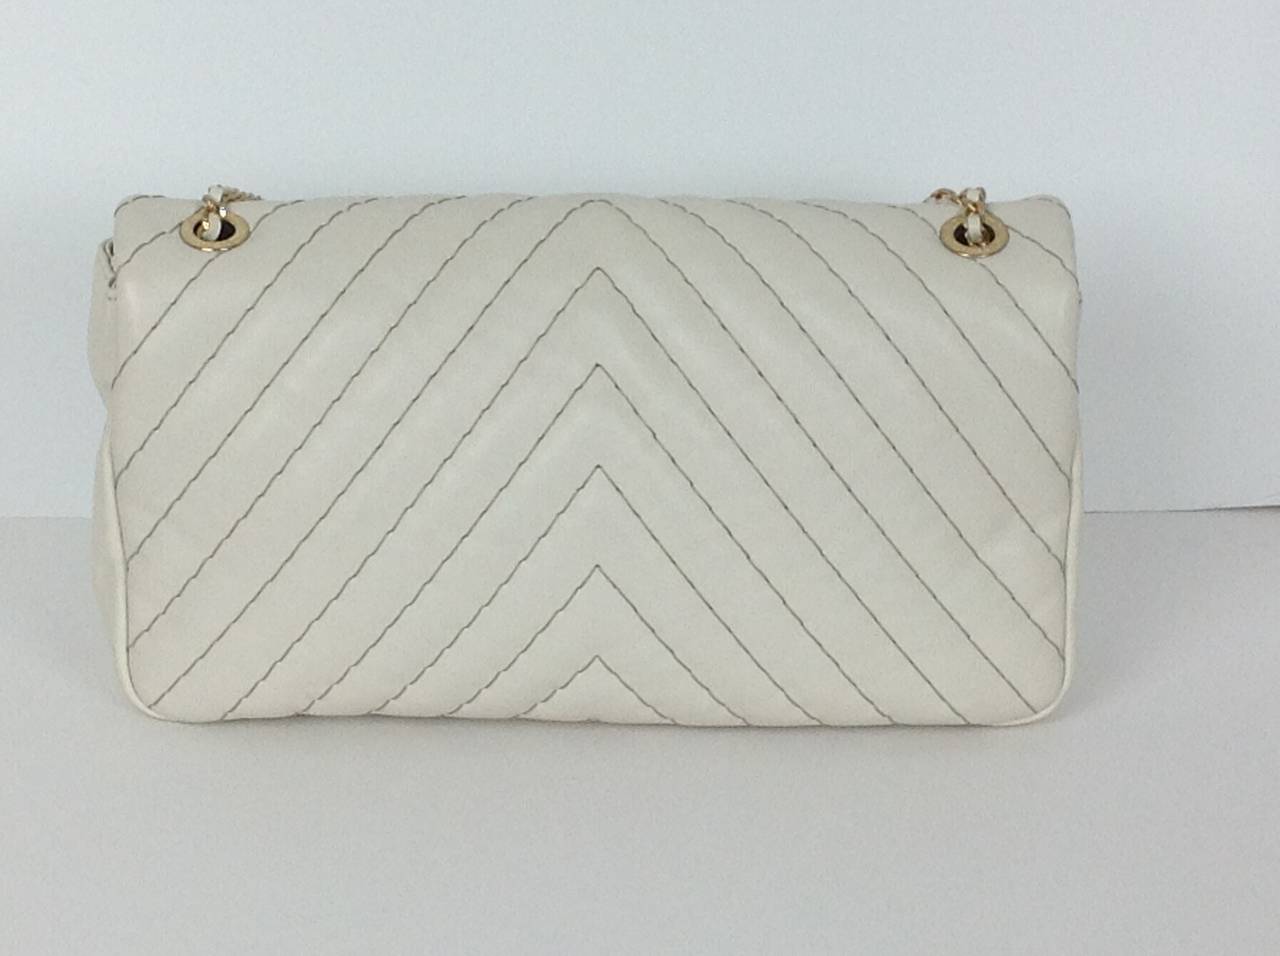 Creamy dreamy Chanel Half Flap Chevron handbag.  Just delicious!
Soft lambskin, chevron quilted with khaki thread. From Spring 2013 collection.
Gold tone mini chain woven with leather.  Chain has 6.38